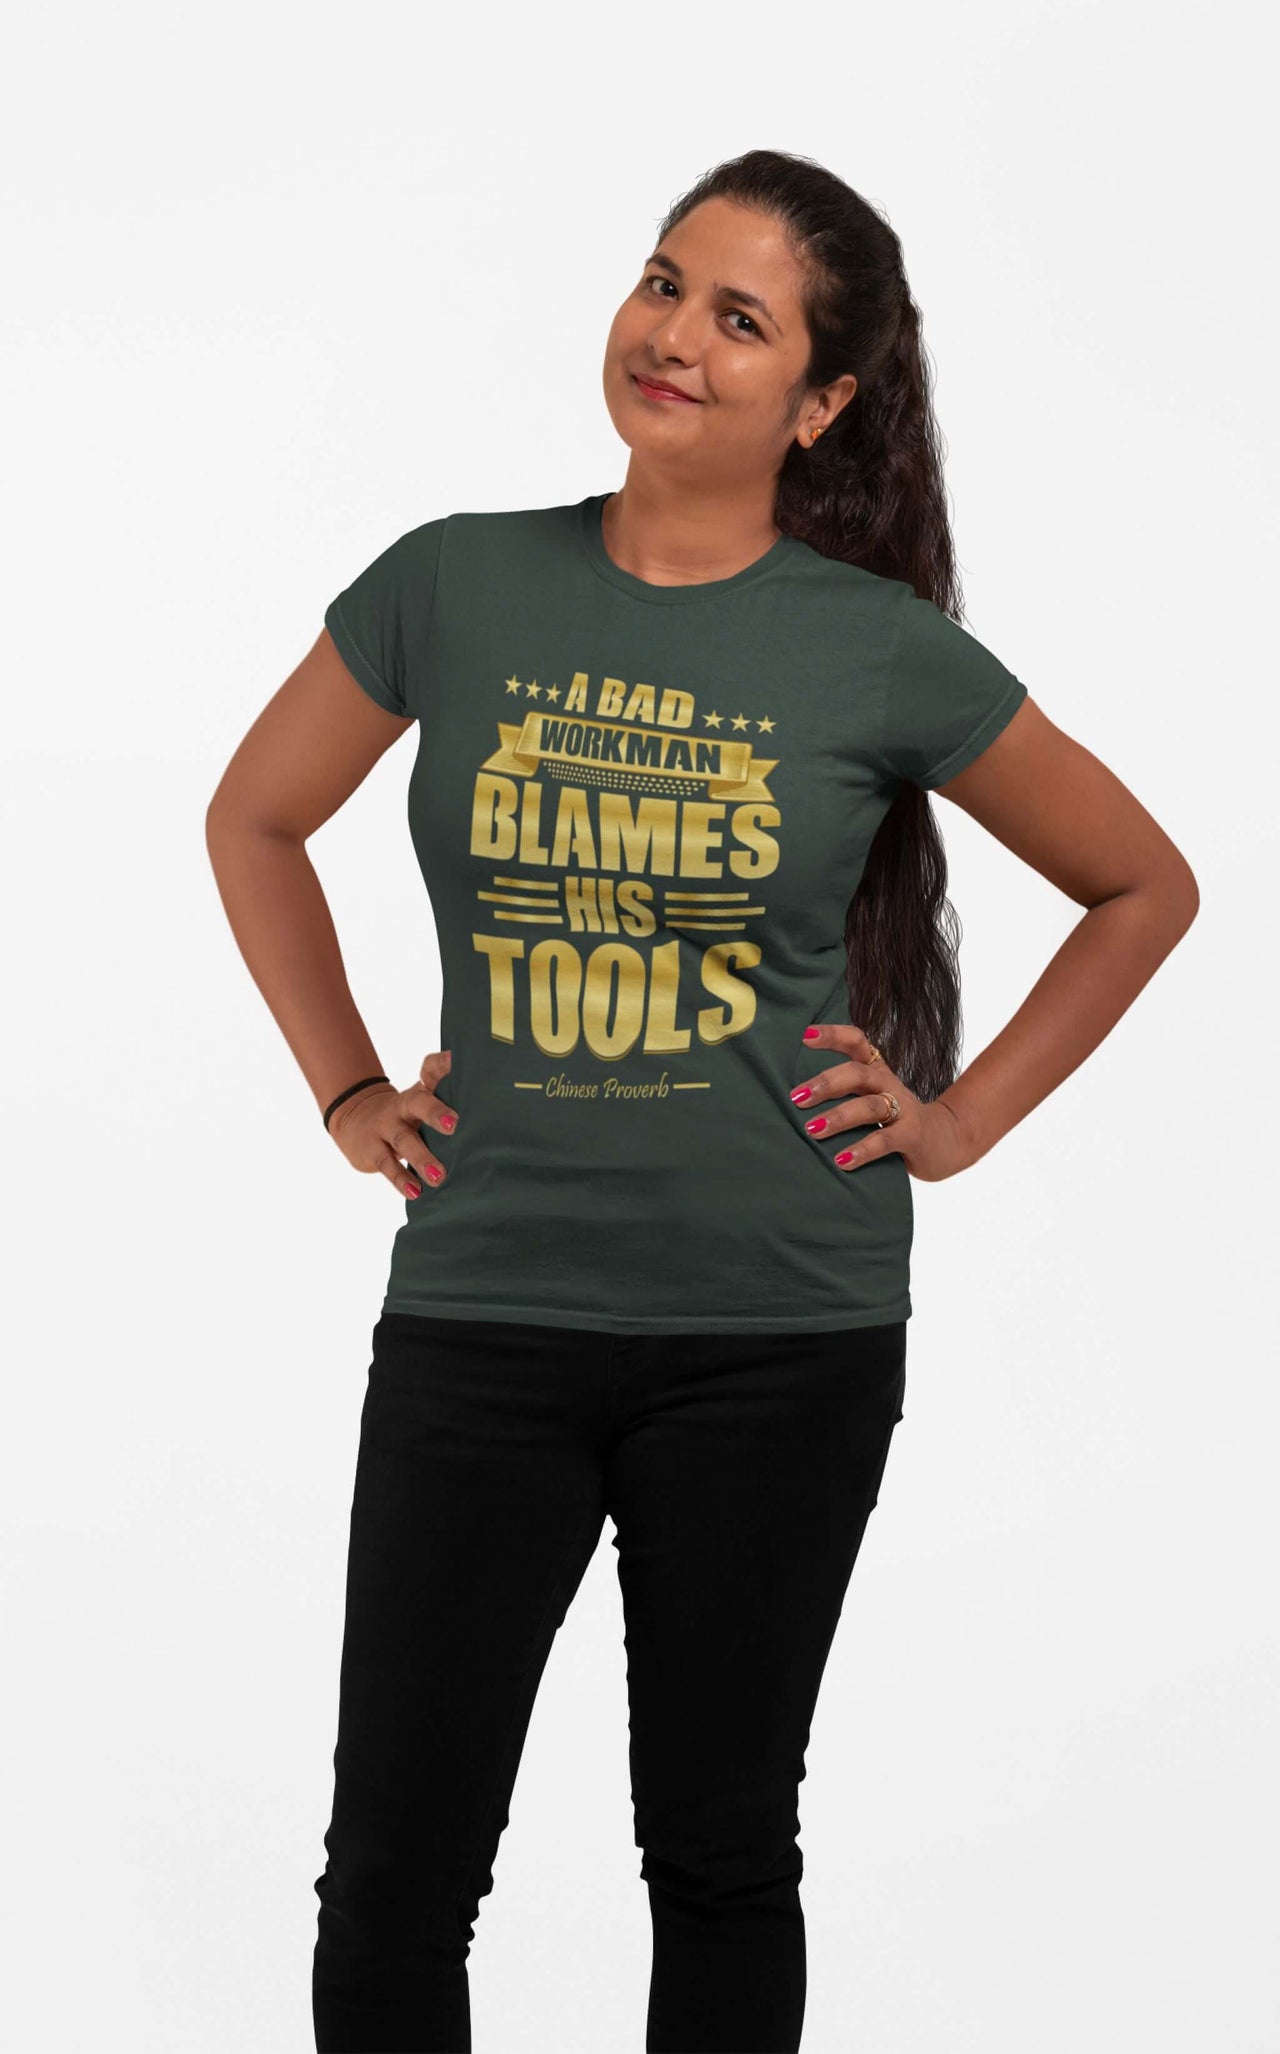 A Bad Workman Blames His Tools - Chinese Proverb - Unisex Tee